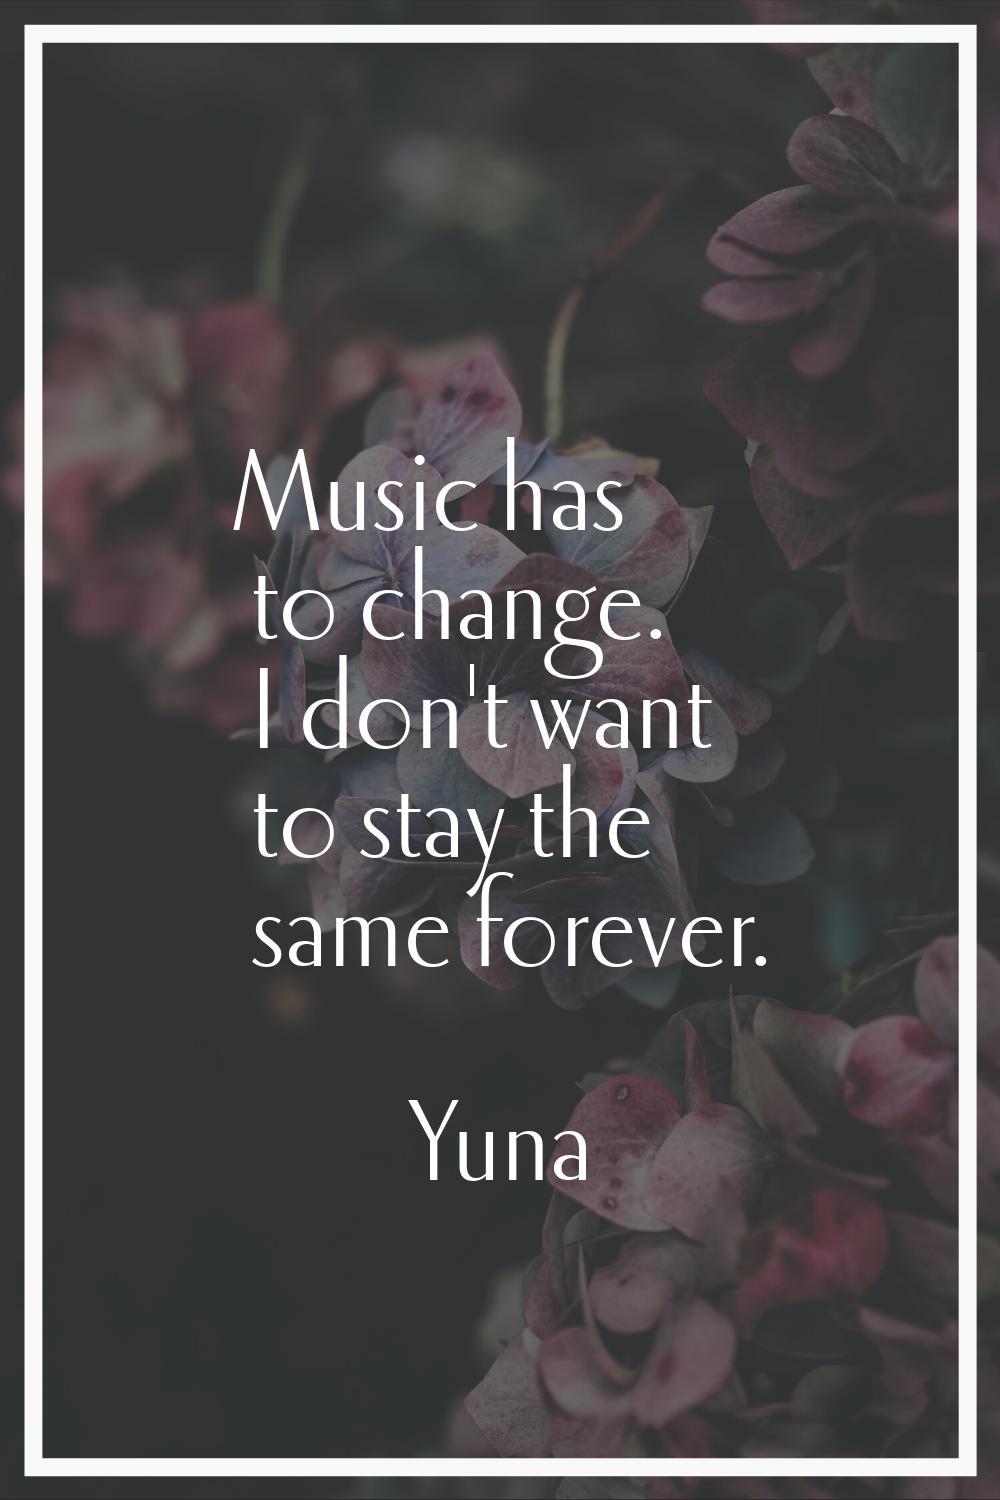 Music has to change. I don't want to stay the same forever.